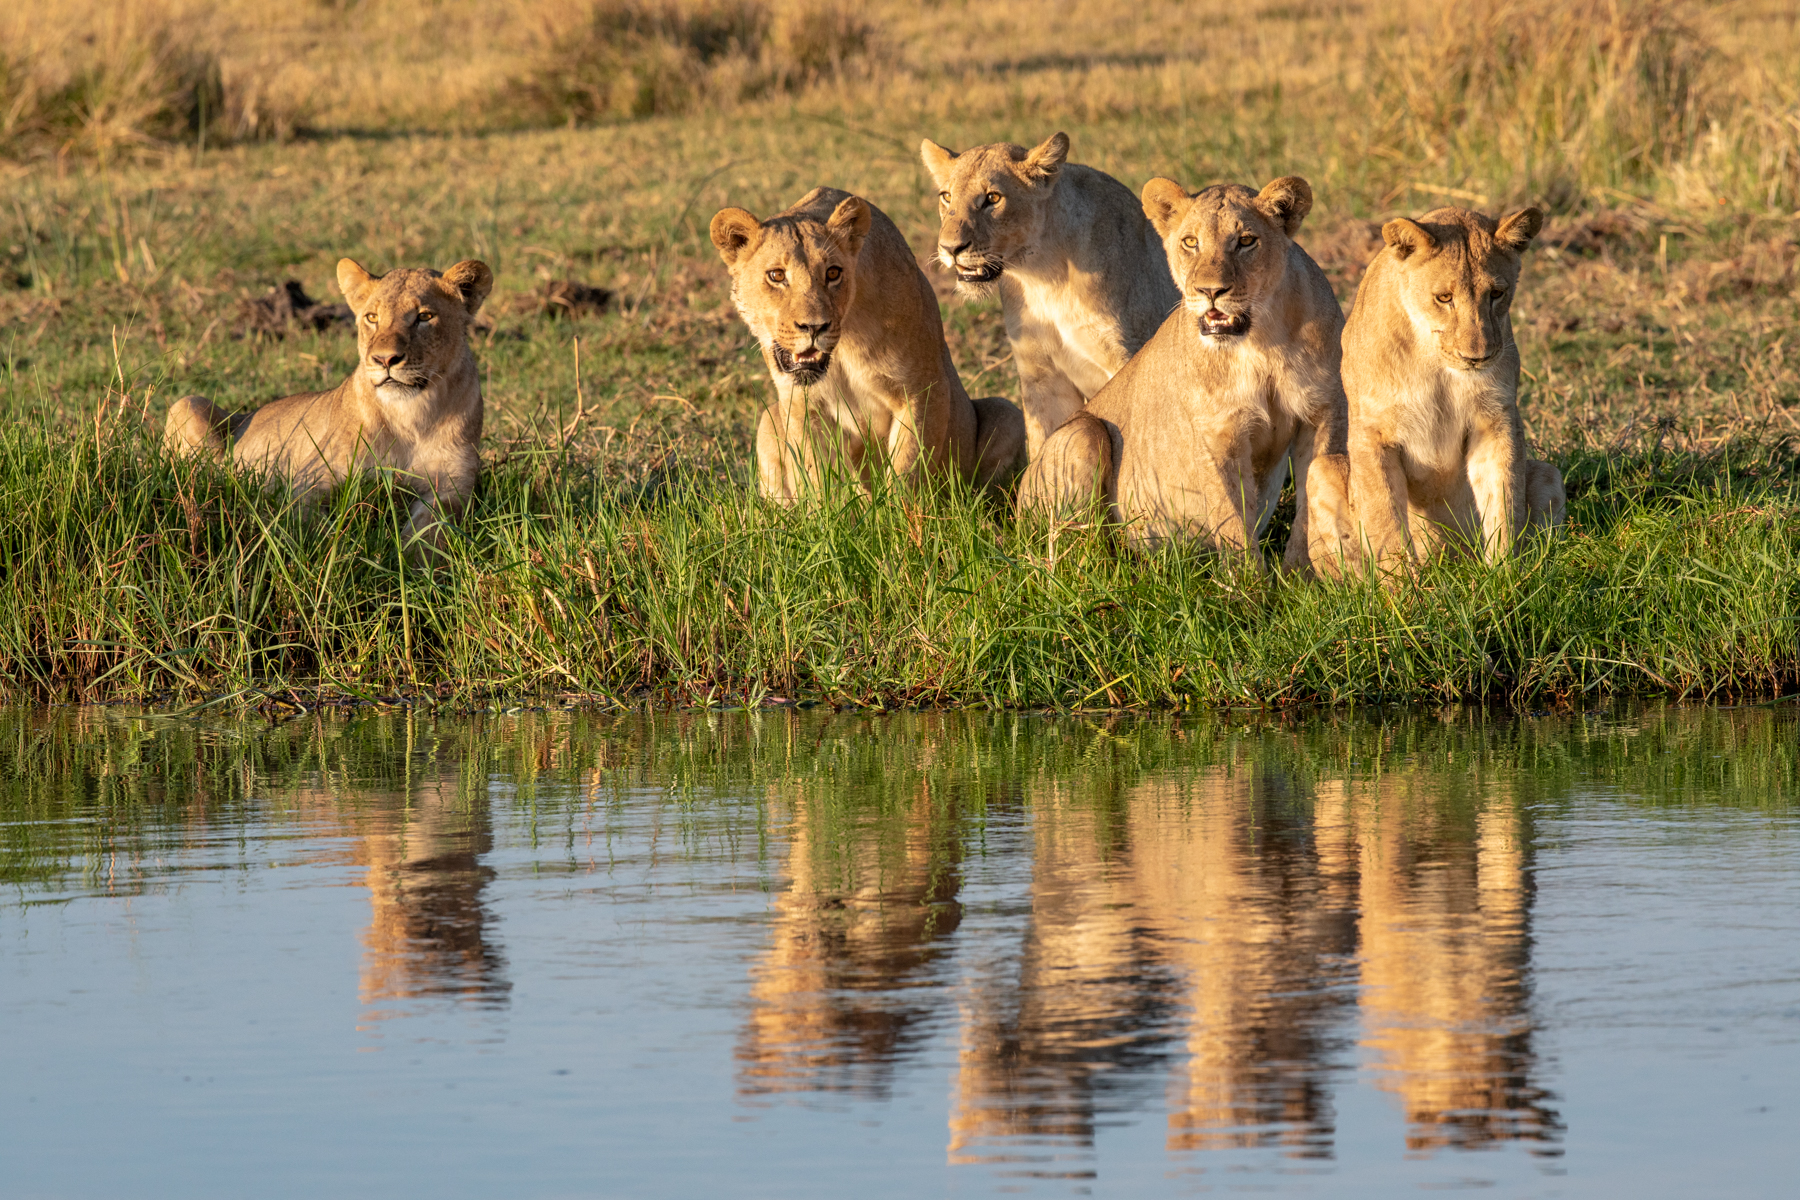 Lions at the river bank